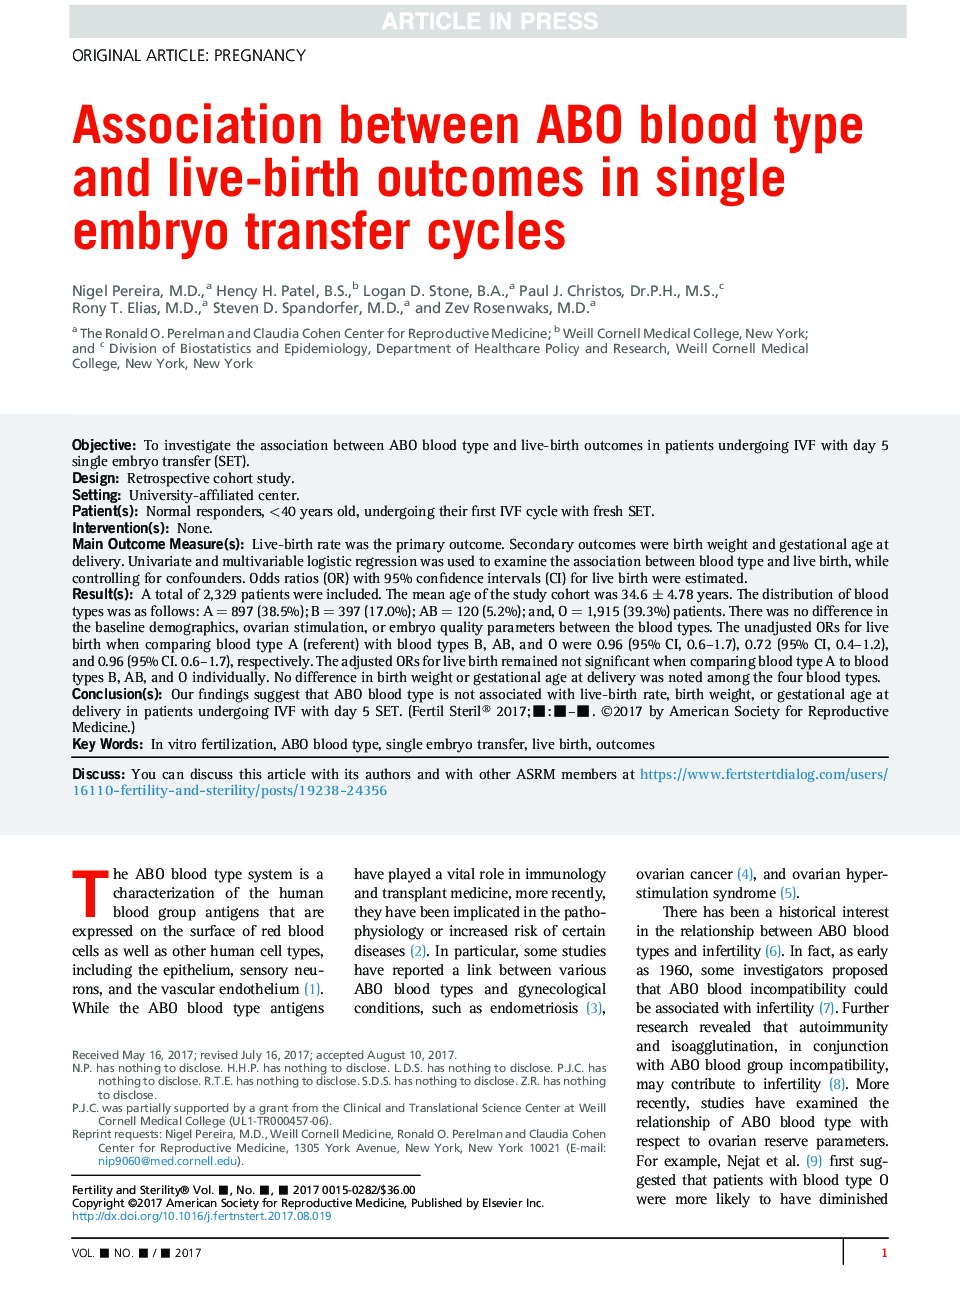 Association between ABO blood type and live-birth outcomes in single-embryo transfer cycles